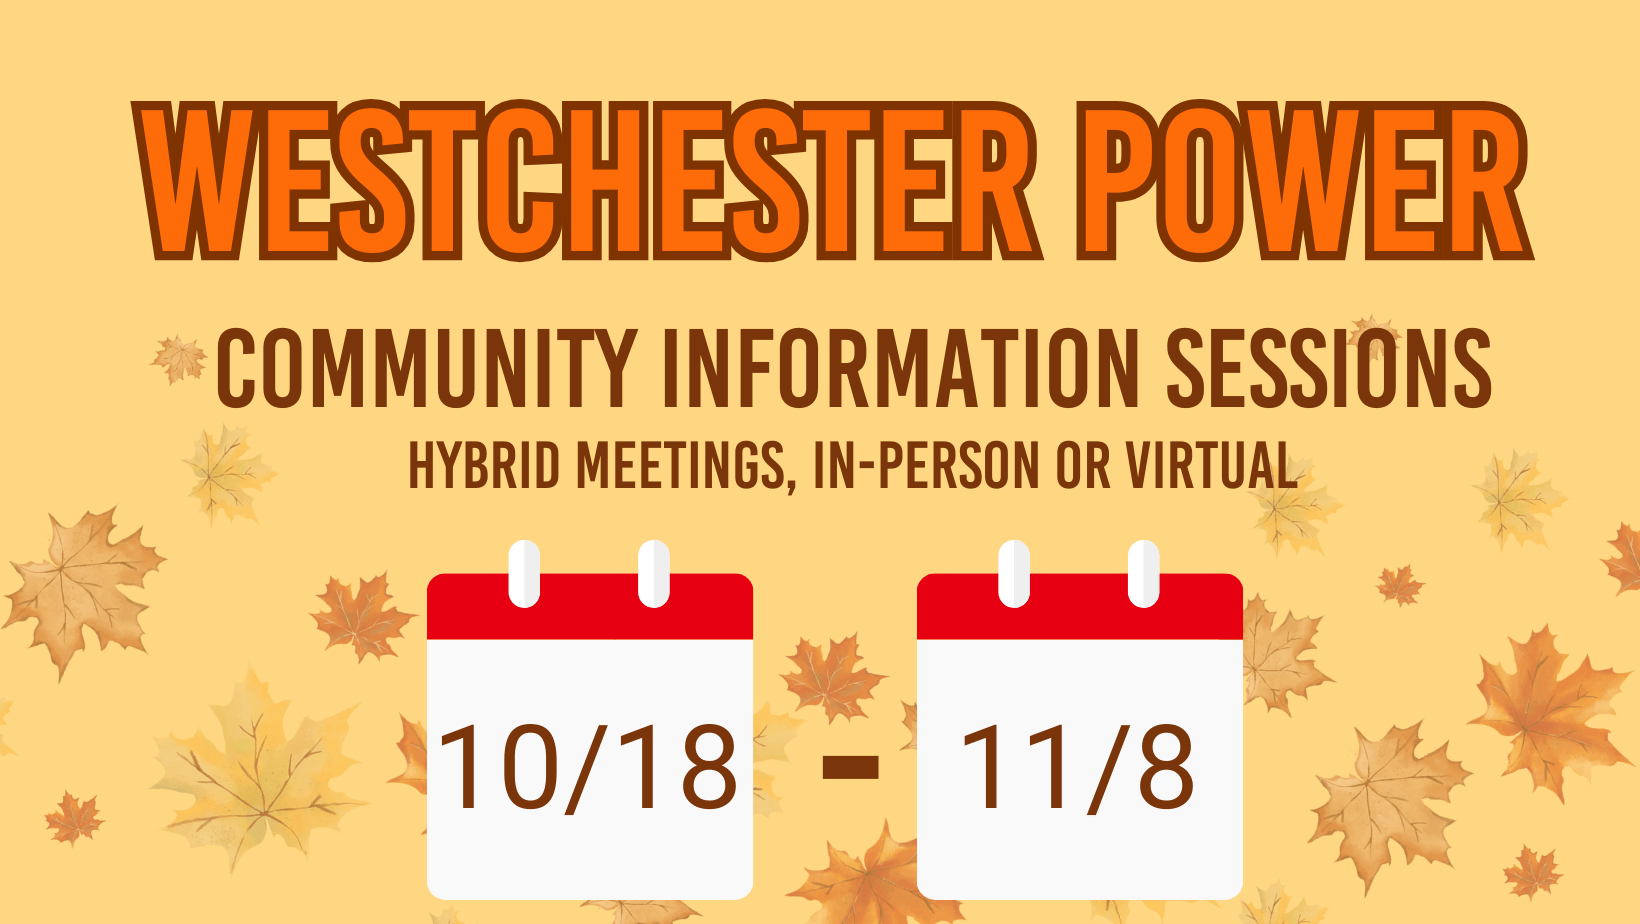 Westchester Power Community Information Sessions